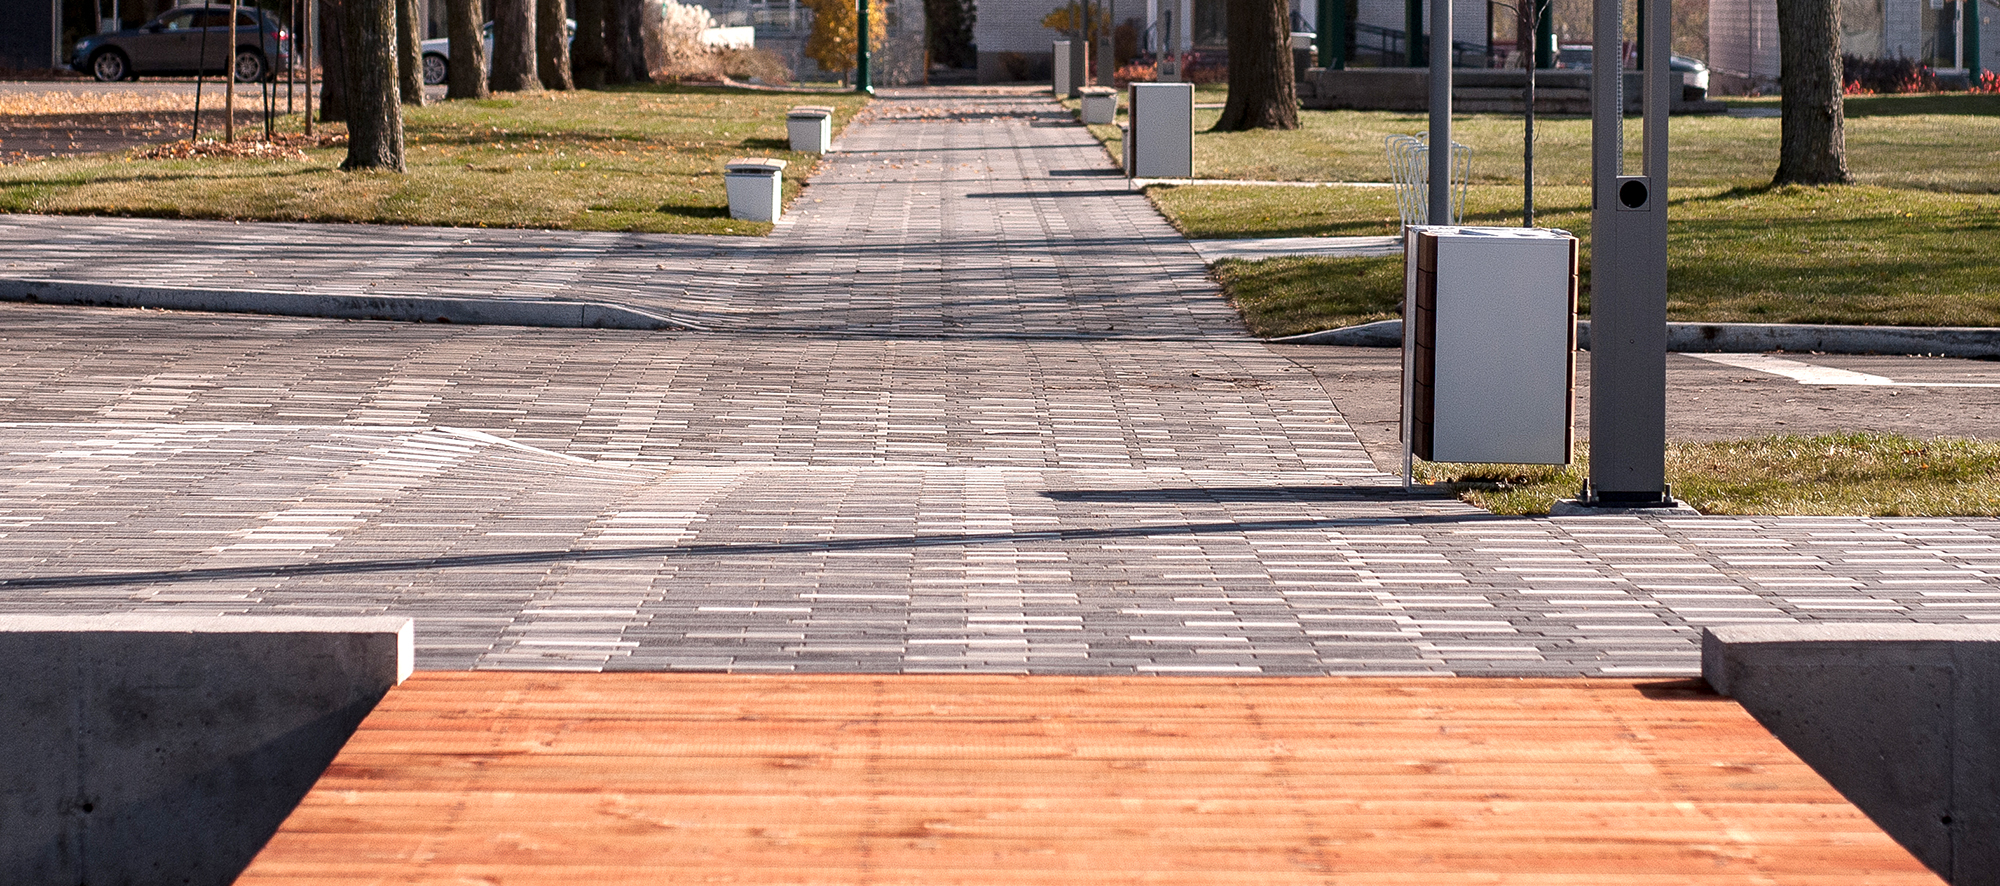 A boardwalk-style walkway transitions to tri-colored Il Campo laid horizontally moving left and right toward the road.